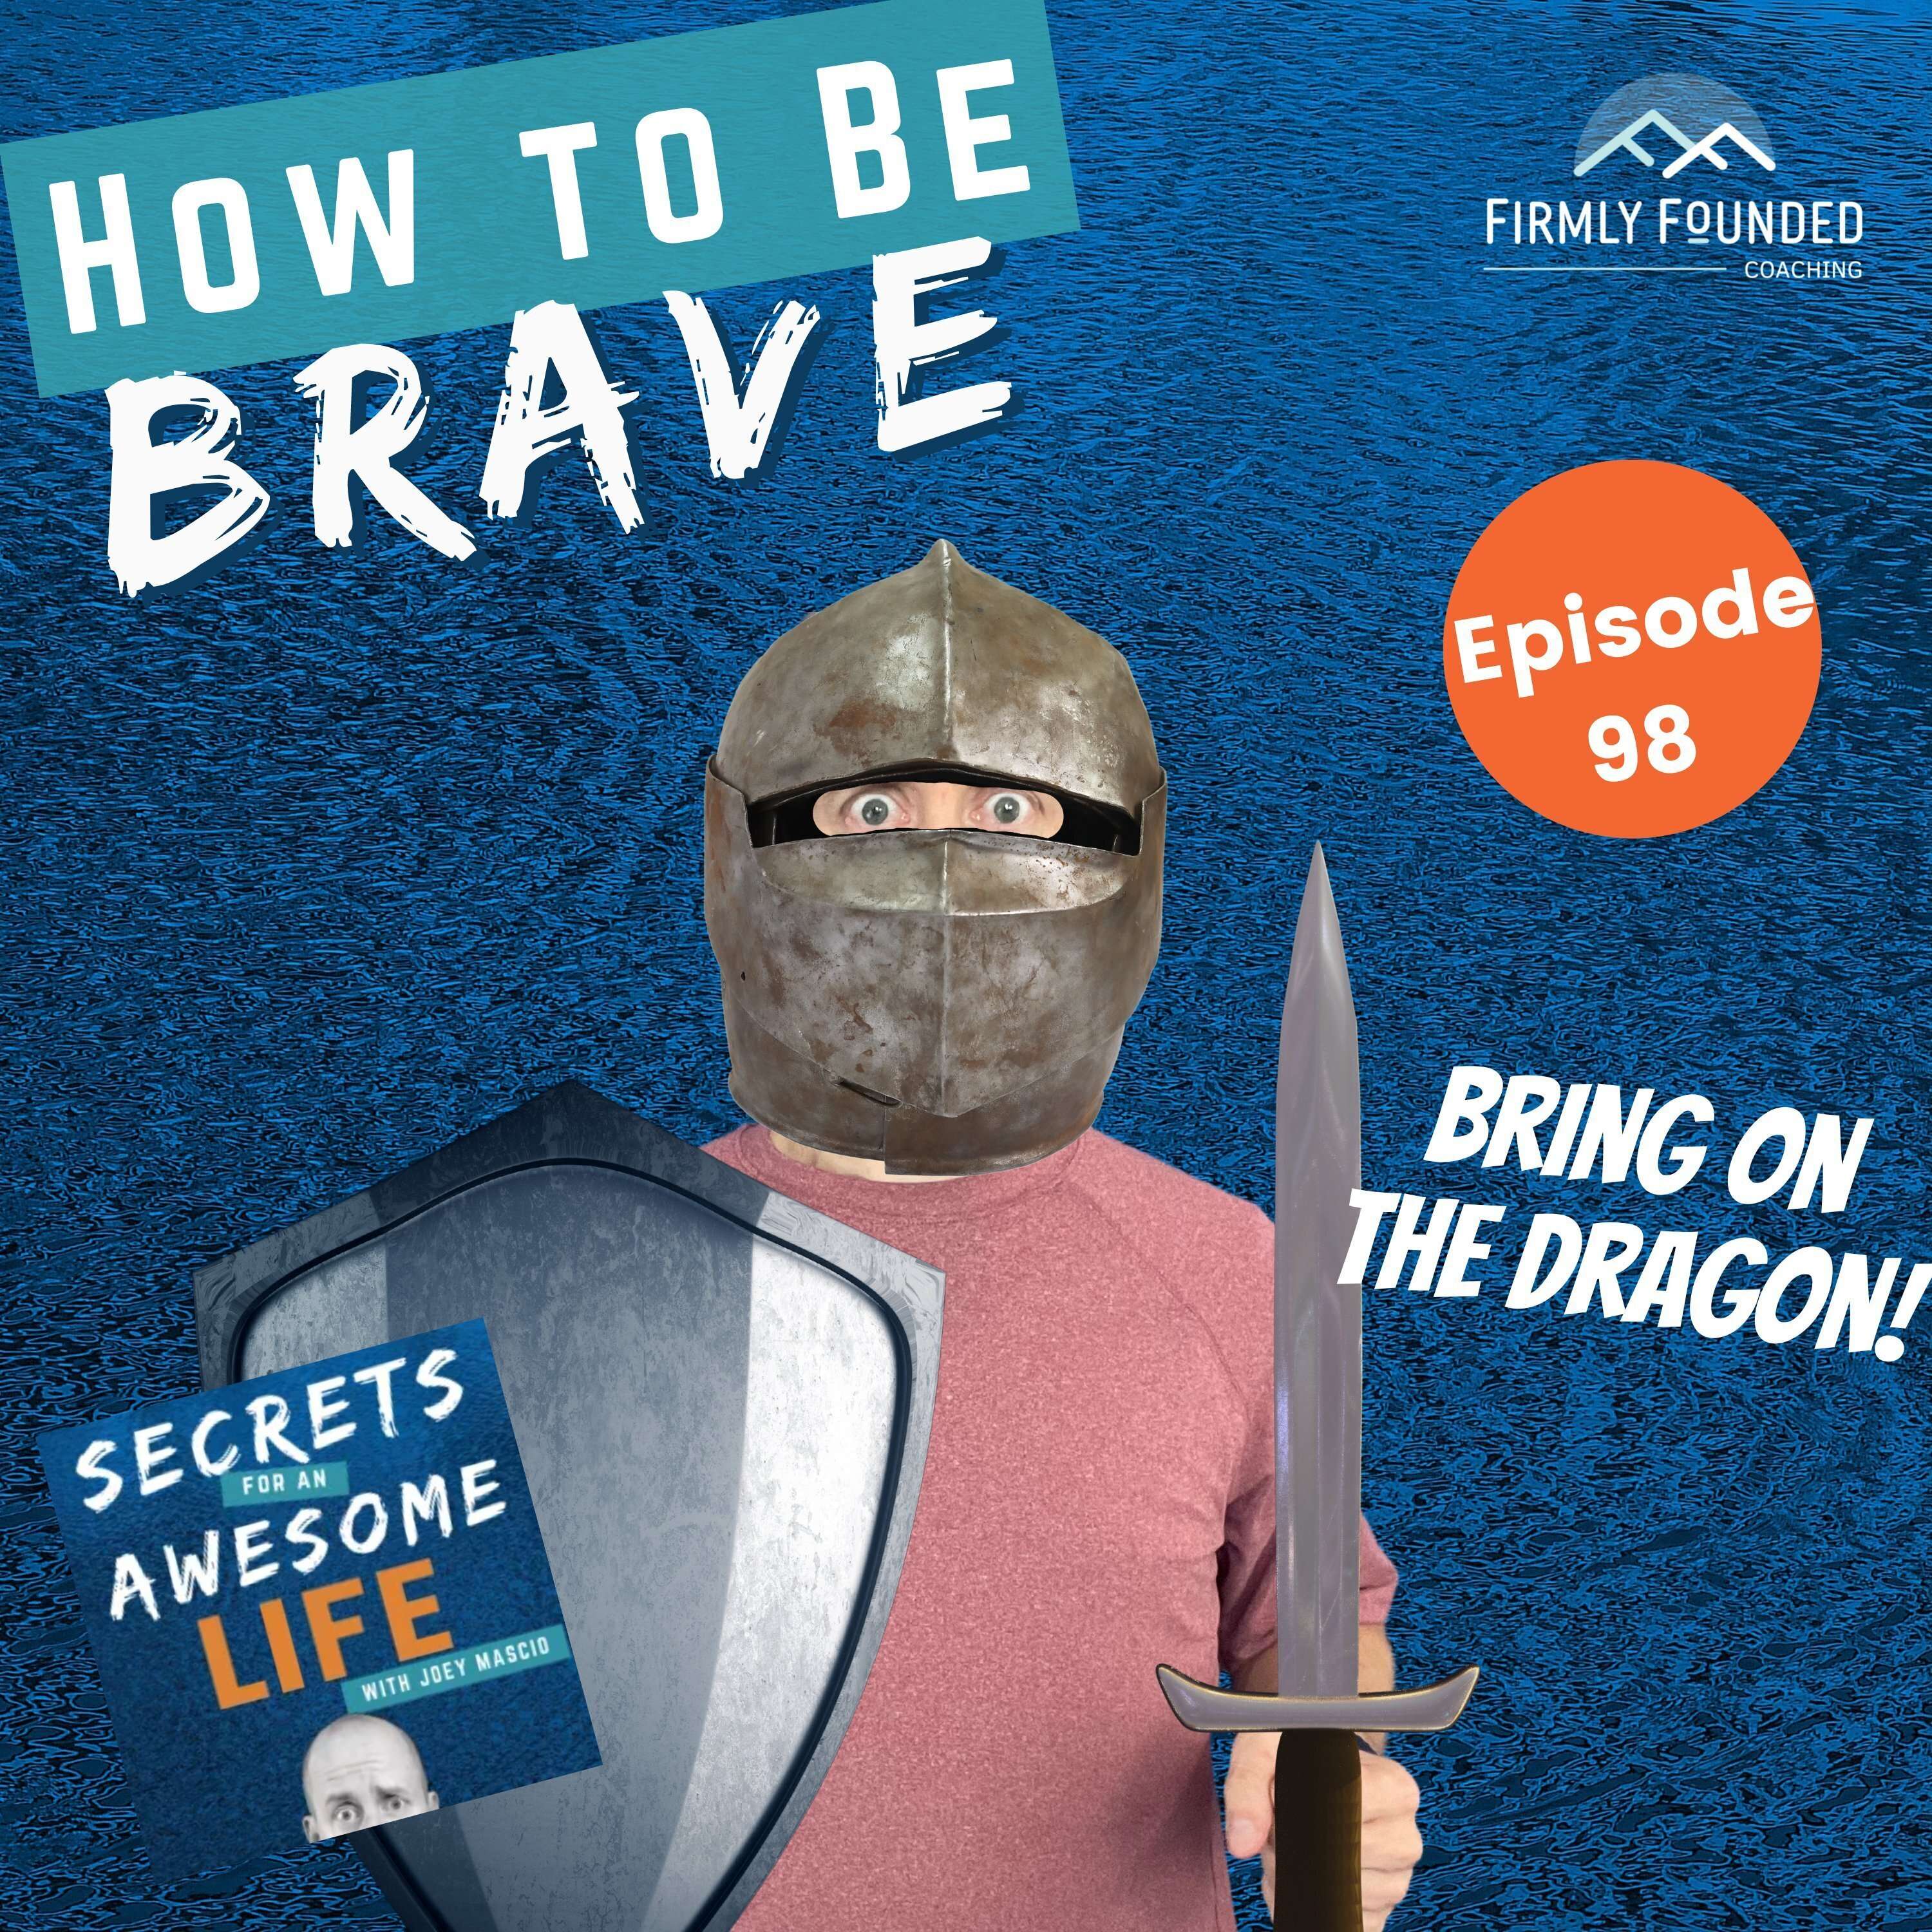 How to Be Brave